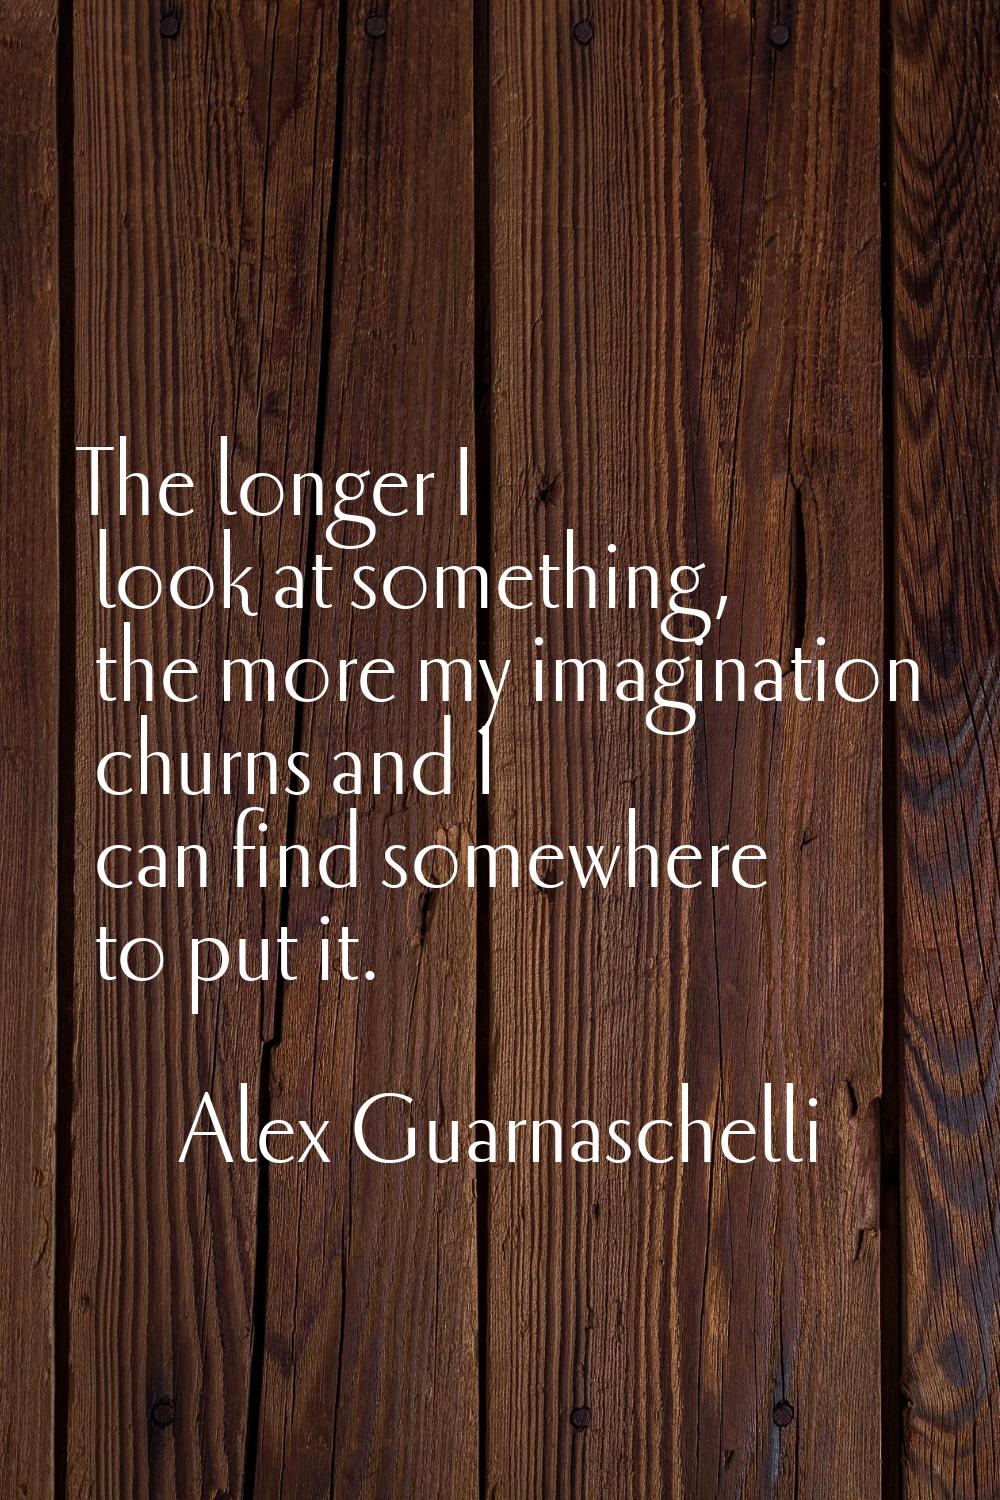 The longer I look at something, the more my imagination churns and I can find somewhere to put it.